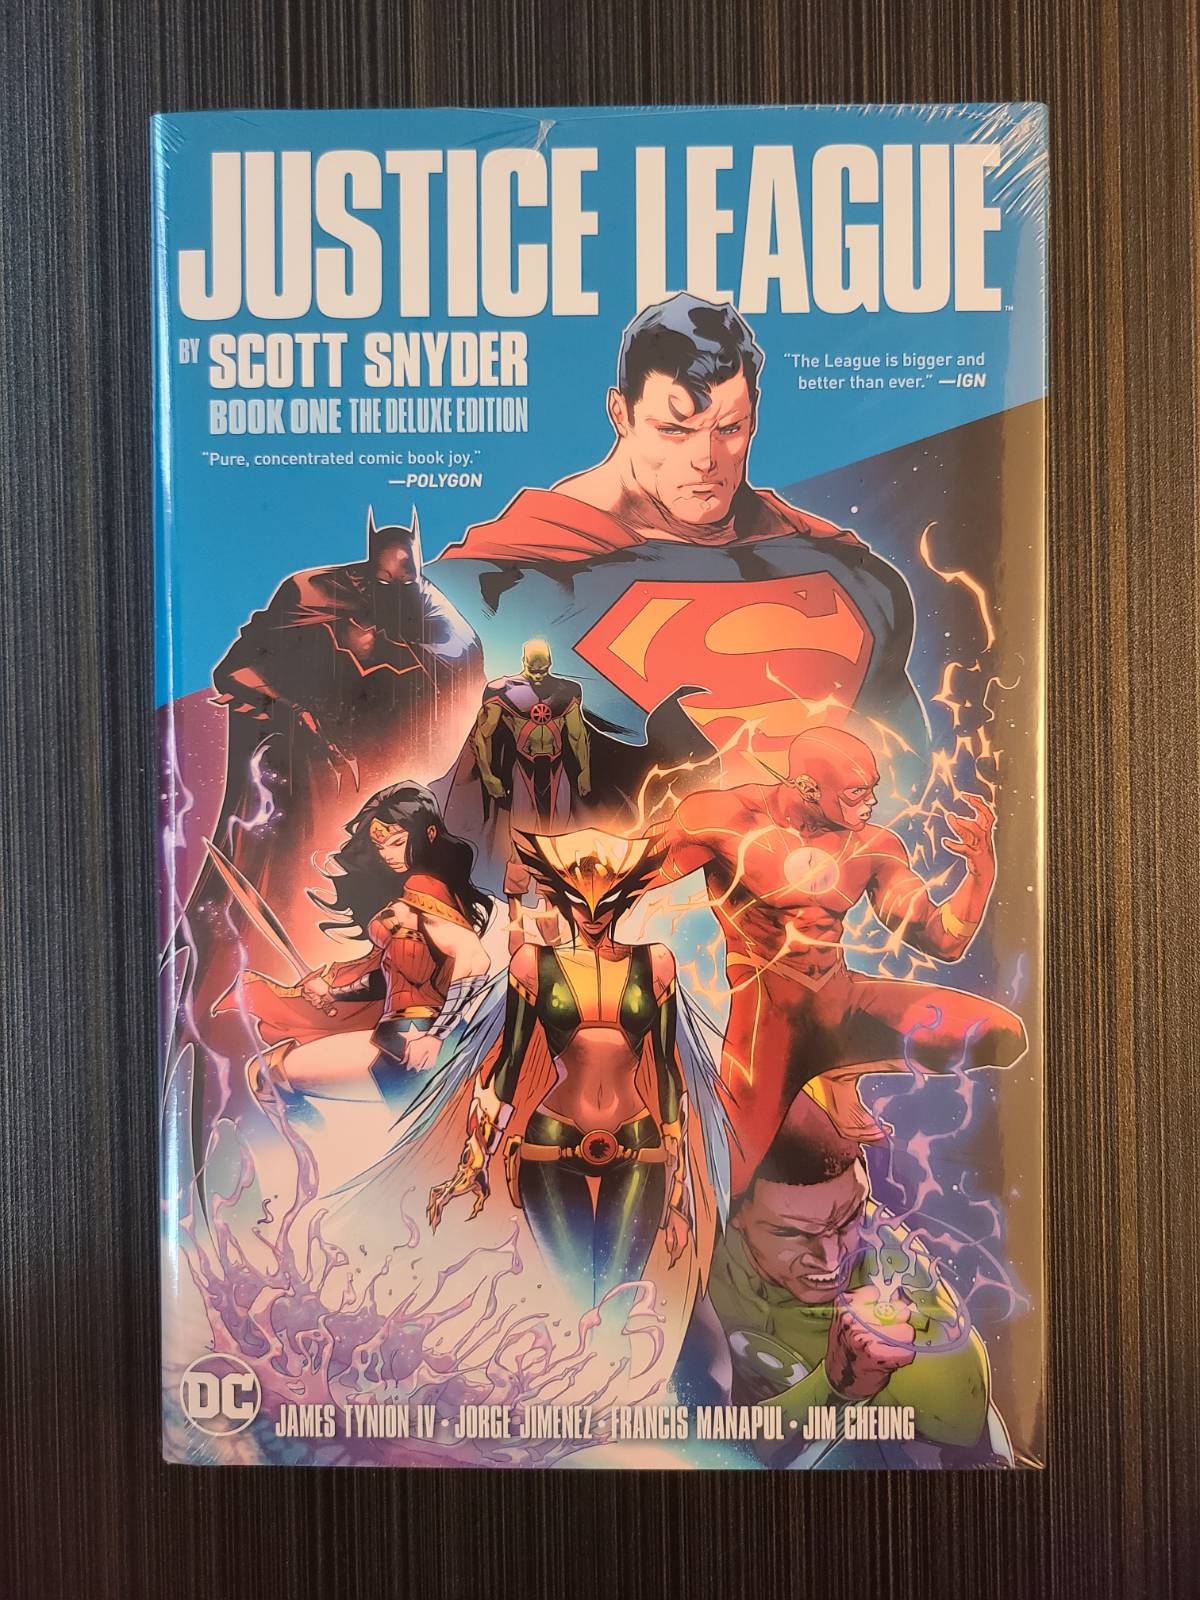 Justice League by Scott Snyder Deluxe Edition Book 01 collected edition comic book